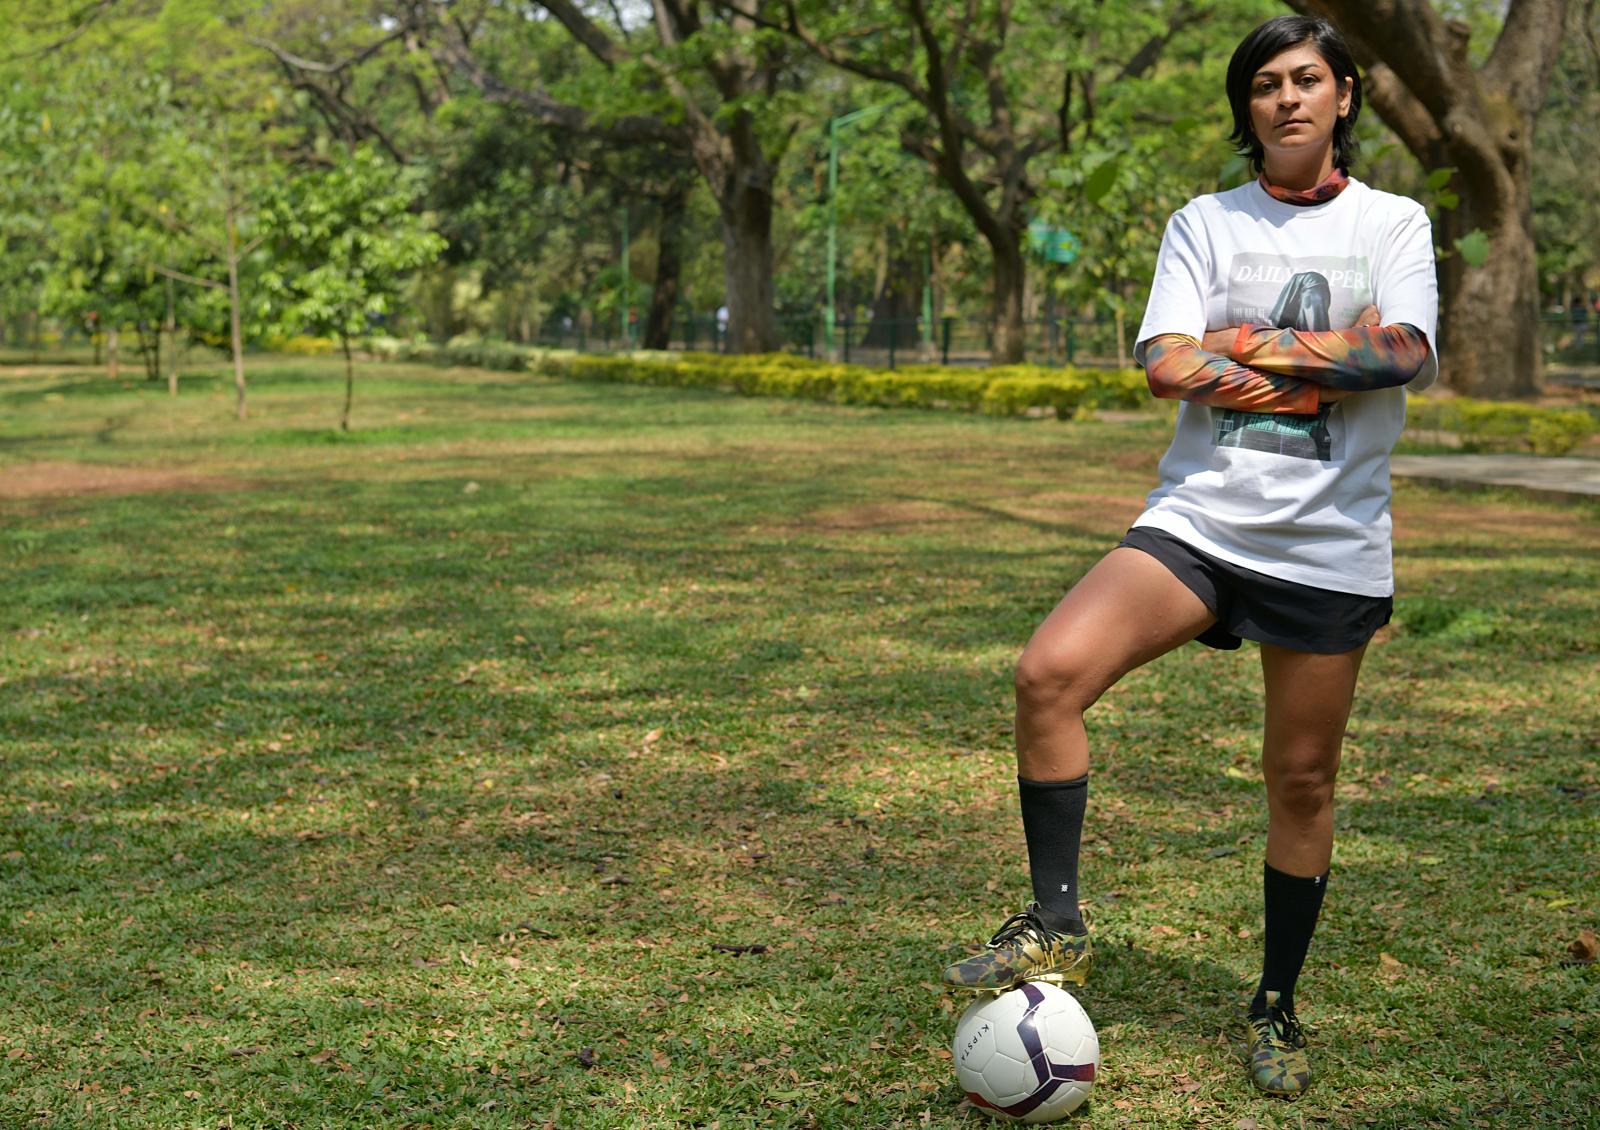 Bhavisha Dave an entrepreneur of a muti-brand streetwear store is also a footballer who has captained the amateur women&#39;s league. She was photographed for an interview with The New Indian Express about her love for sports and how it plays a vital role in team building, creating a healthy work atmosphere.